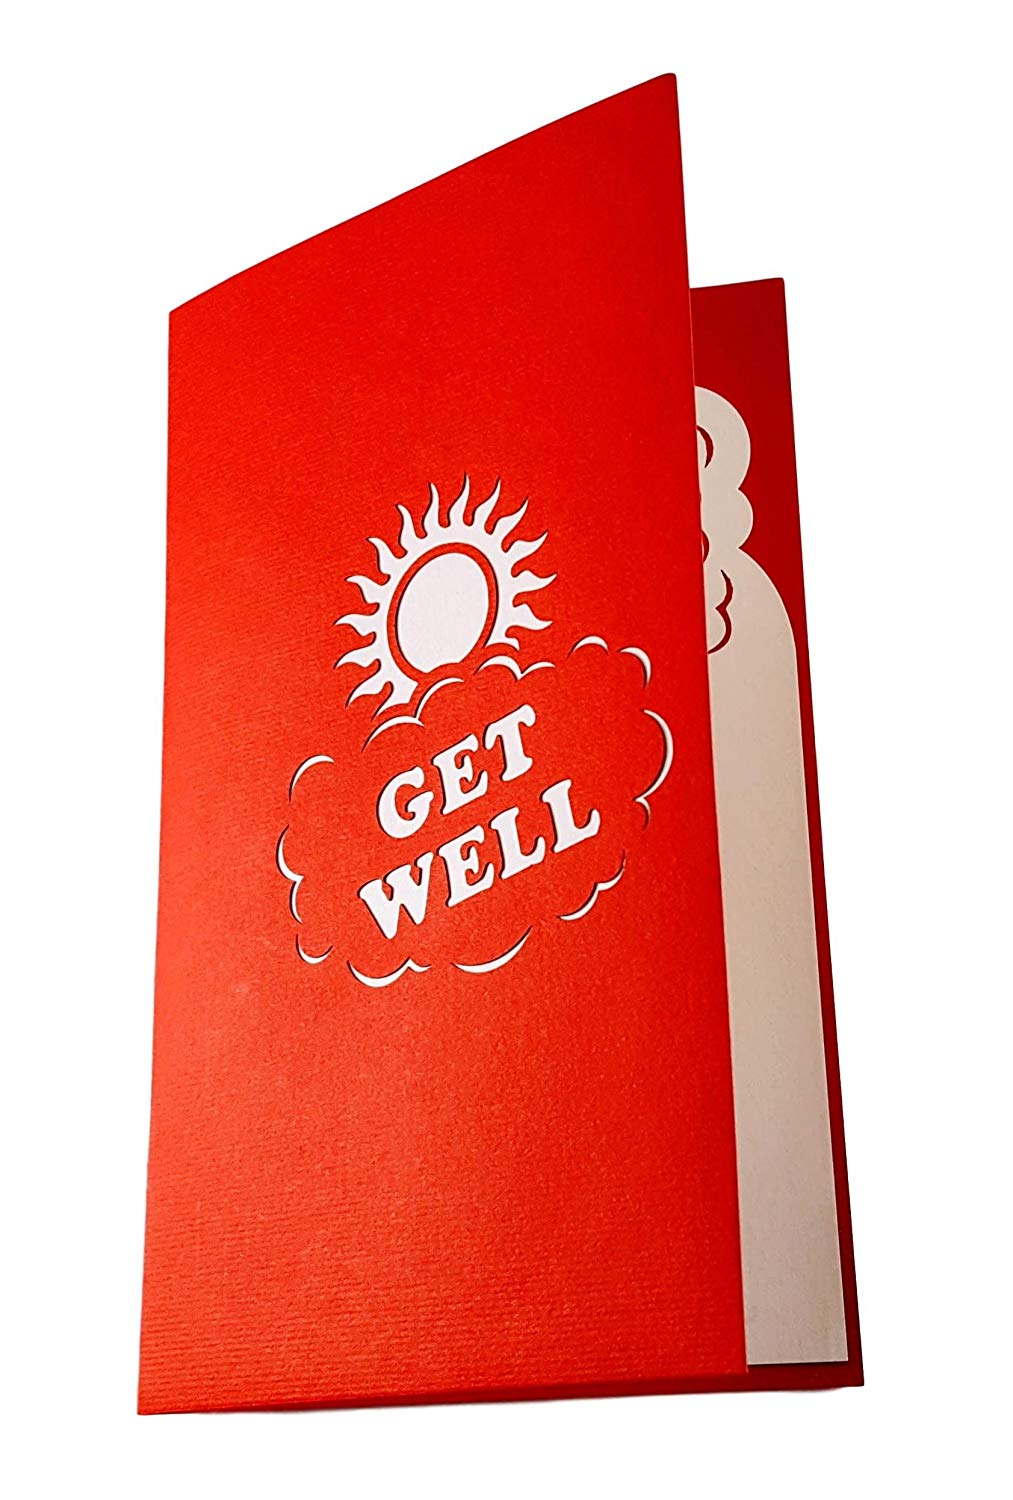 Get Well (Red) 3D Pop Up Greeting Card - Get Well - Thinking Of You - iGifts And Cards